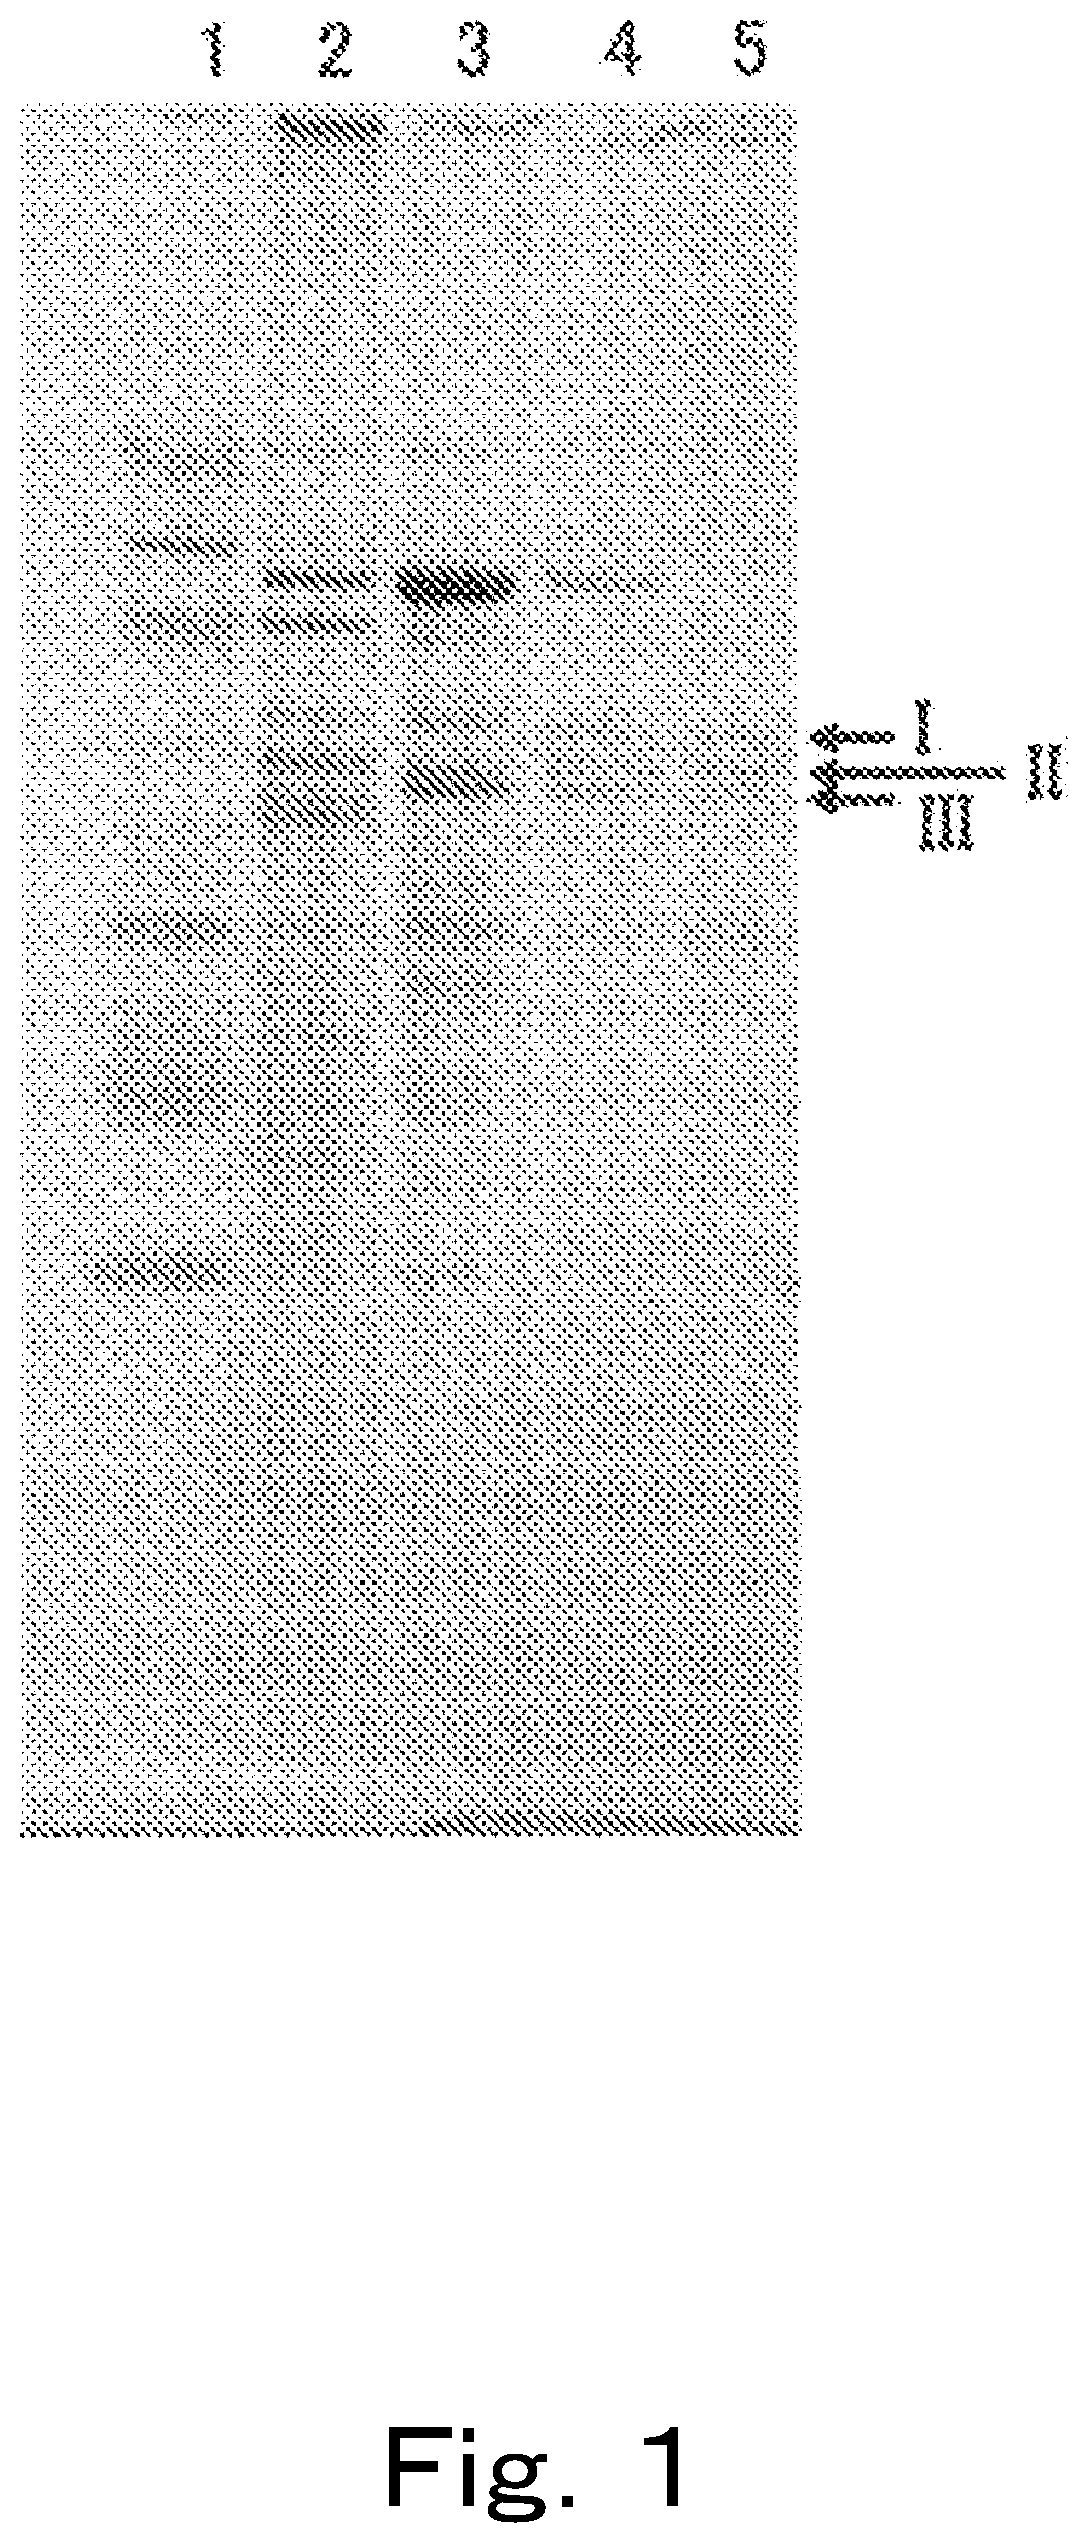 Enzyme capable of dehydroxylating hydroxyl group in urolithin compound